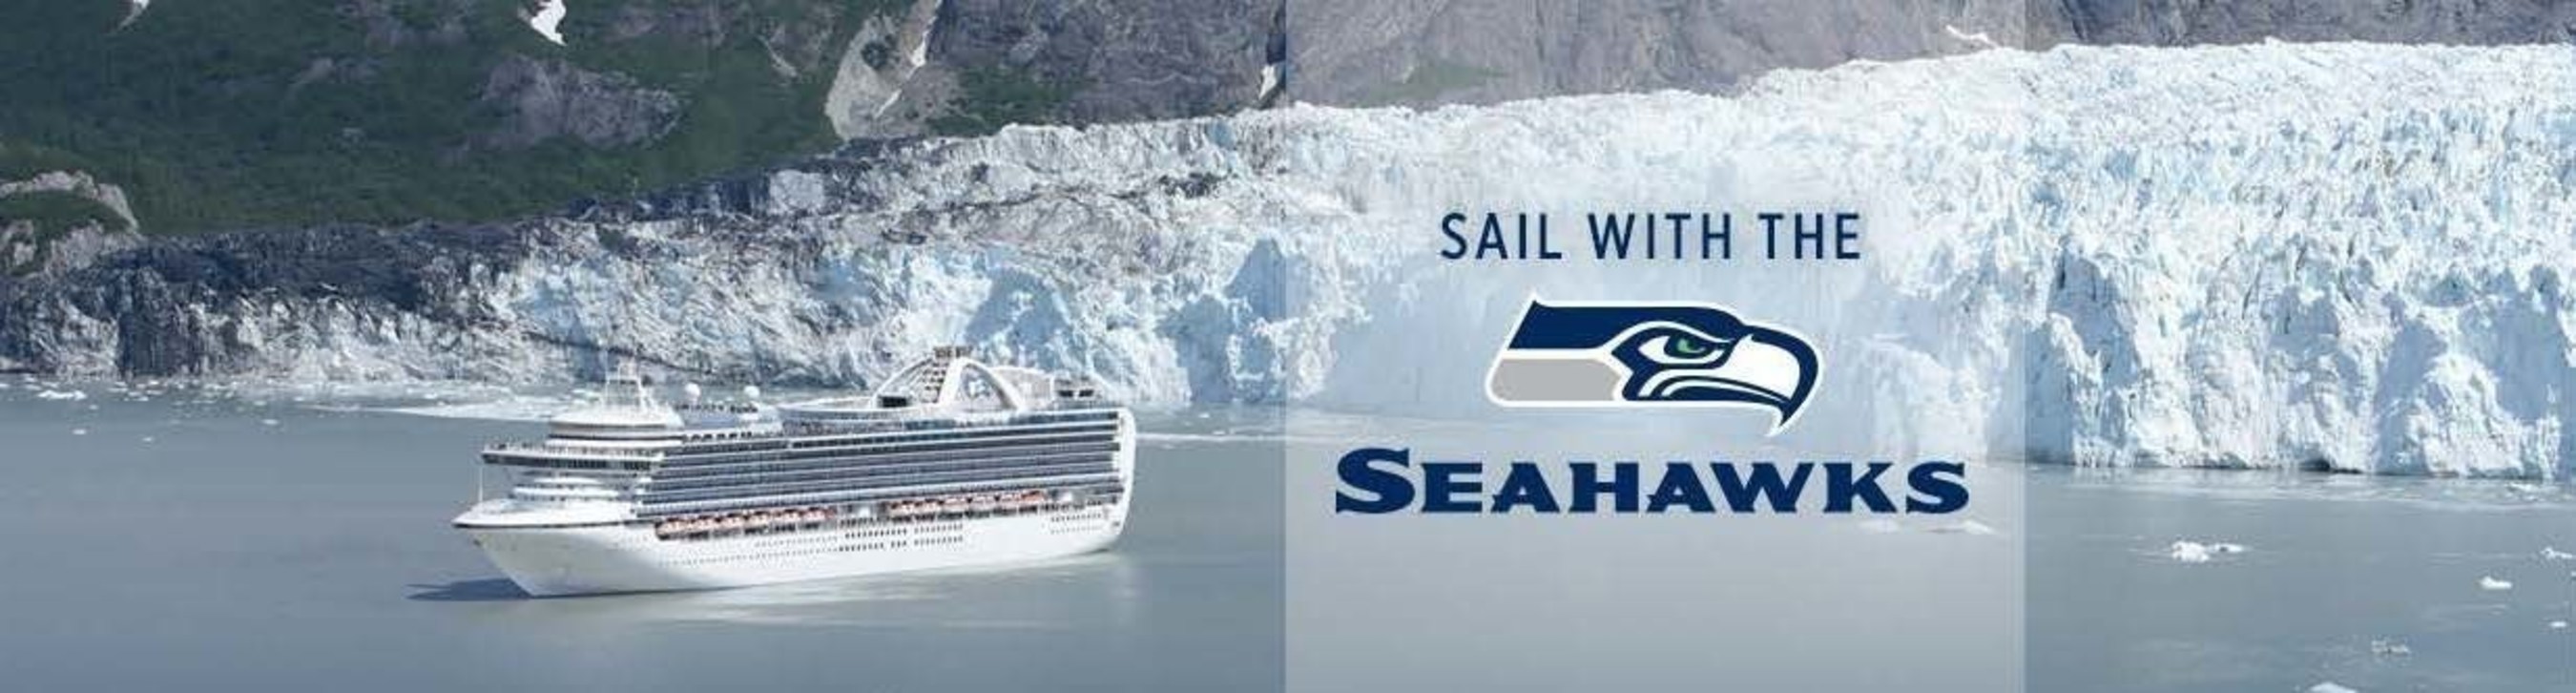 Princess Cruises has announced the players and alumni joining the "Sail with the 12s" Seattle Seahawks Fan Cruise aboard Crown Princess on June 20.